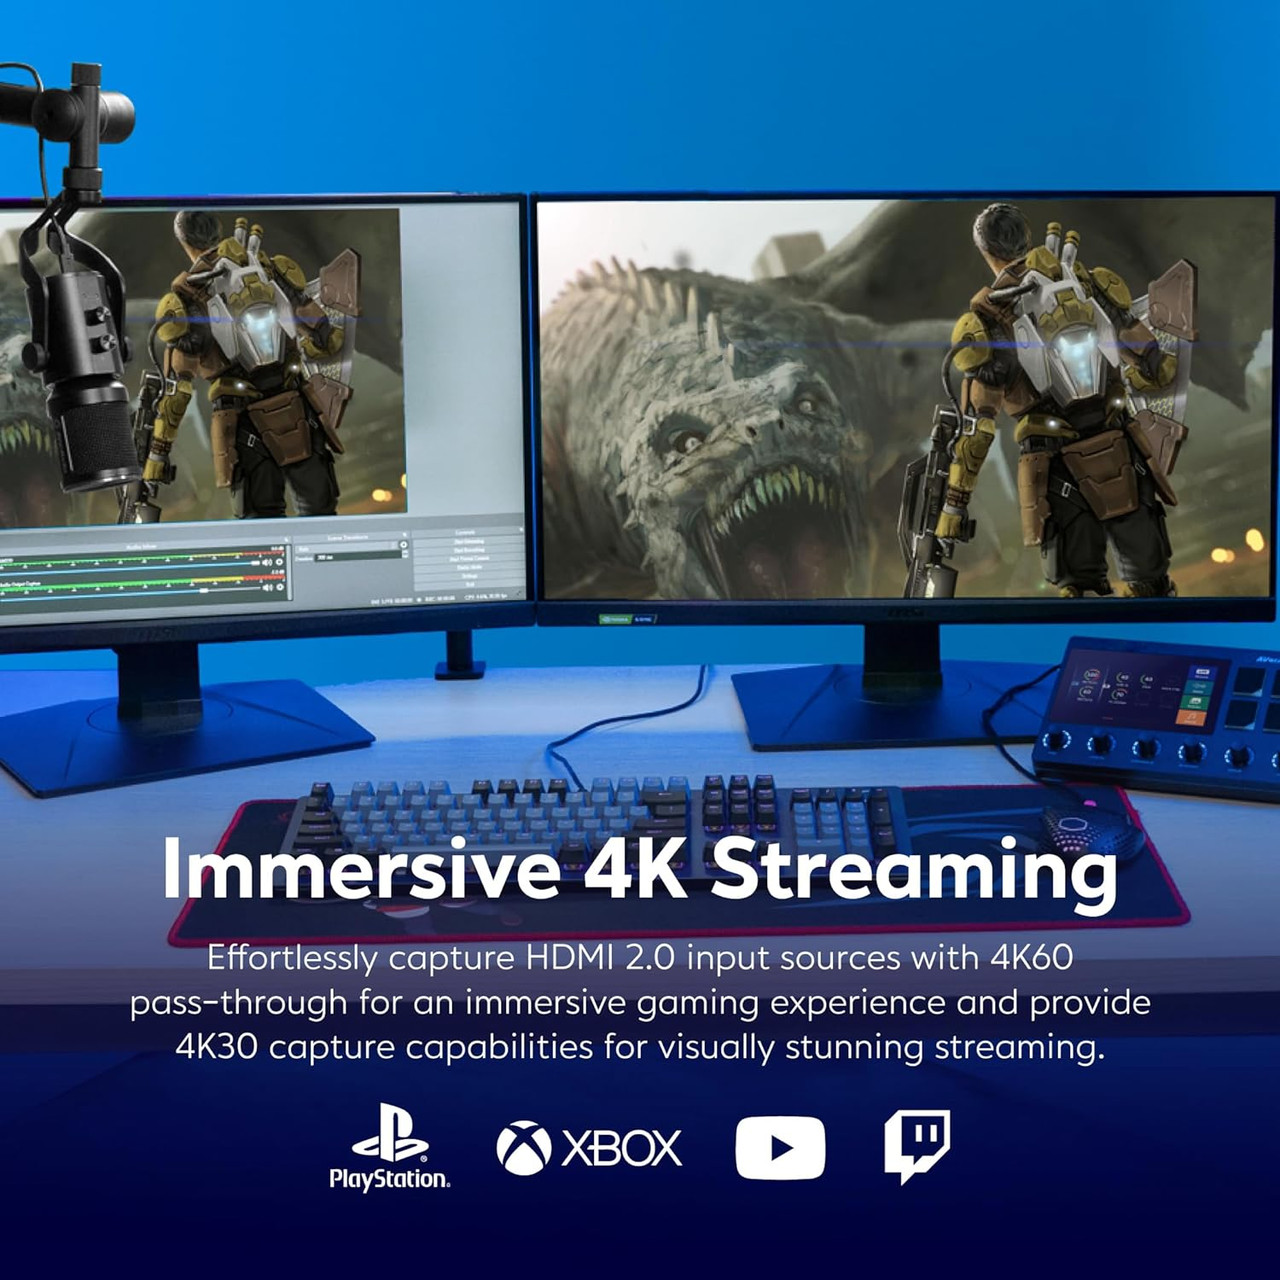 AVerMedia HDMI Capture Card, Live Streamer Ultra HD 4K60 Pass-Through on PS5, PS4 Pro, Xbox, Switch Games (GC571)